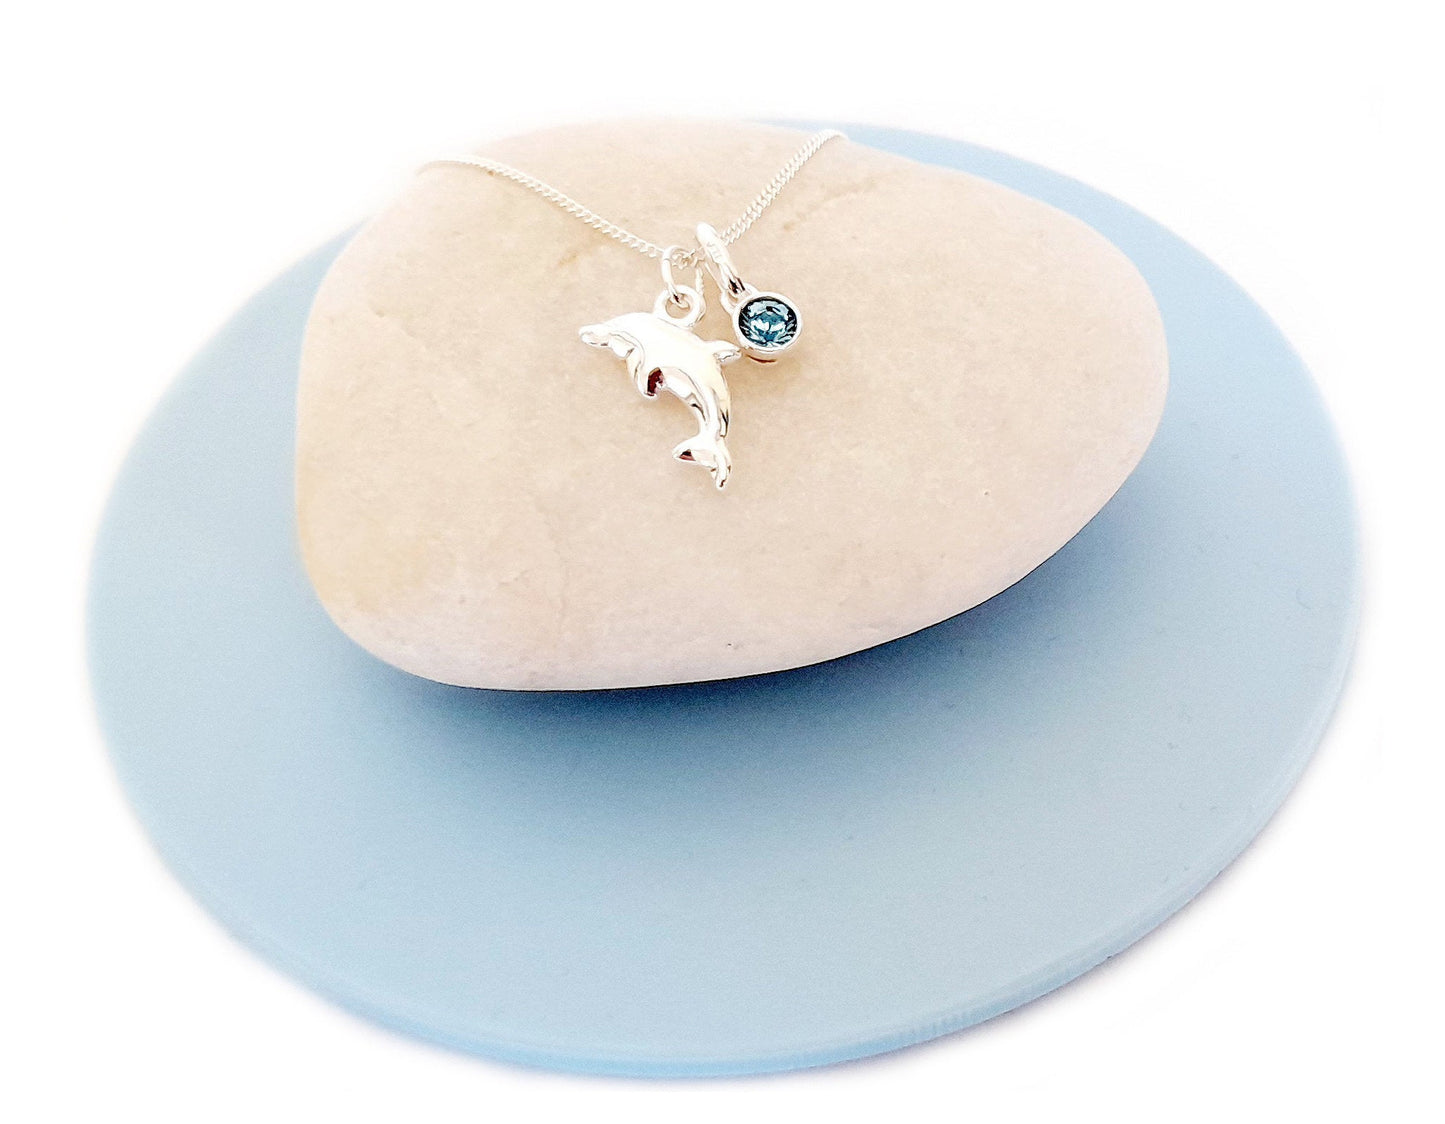 Dolphin 925 Sterling Silver Necklace with Optional Crystal Birthstone - Includes a Personalised Gift Message